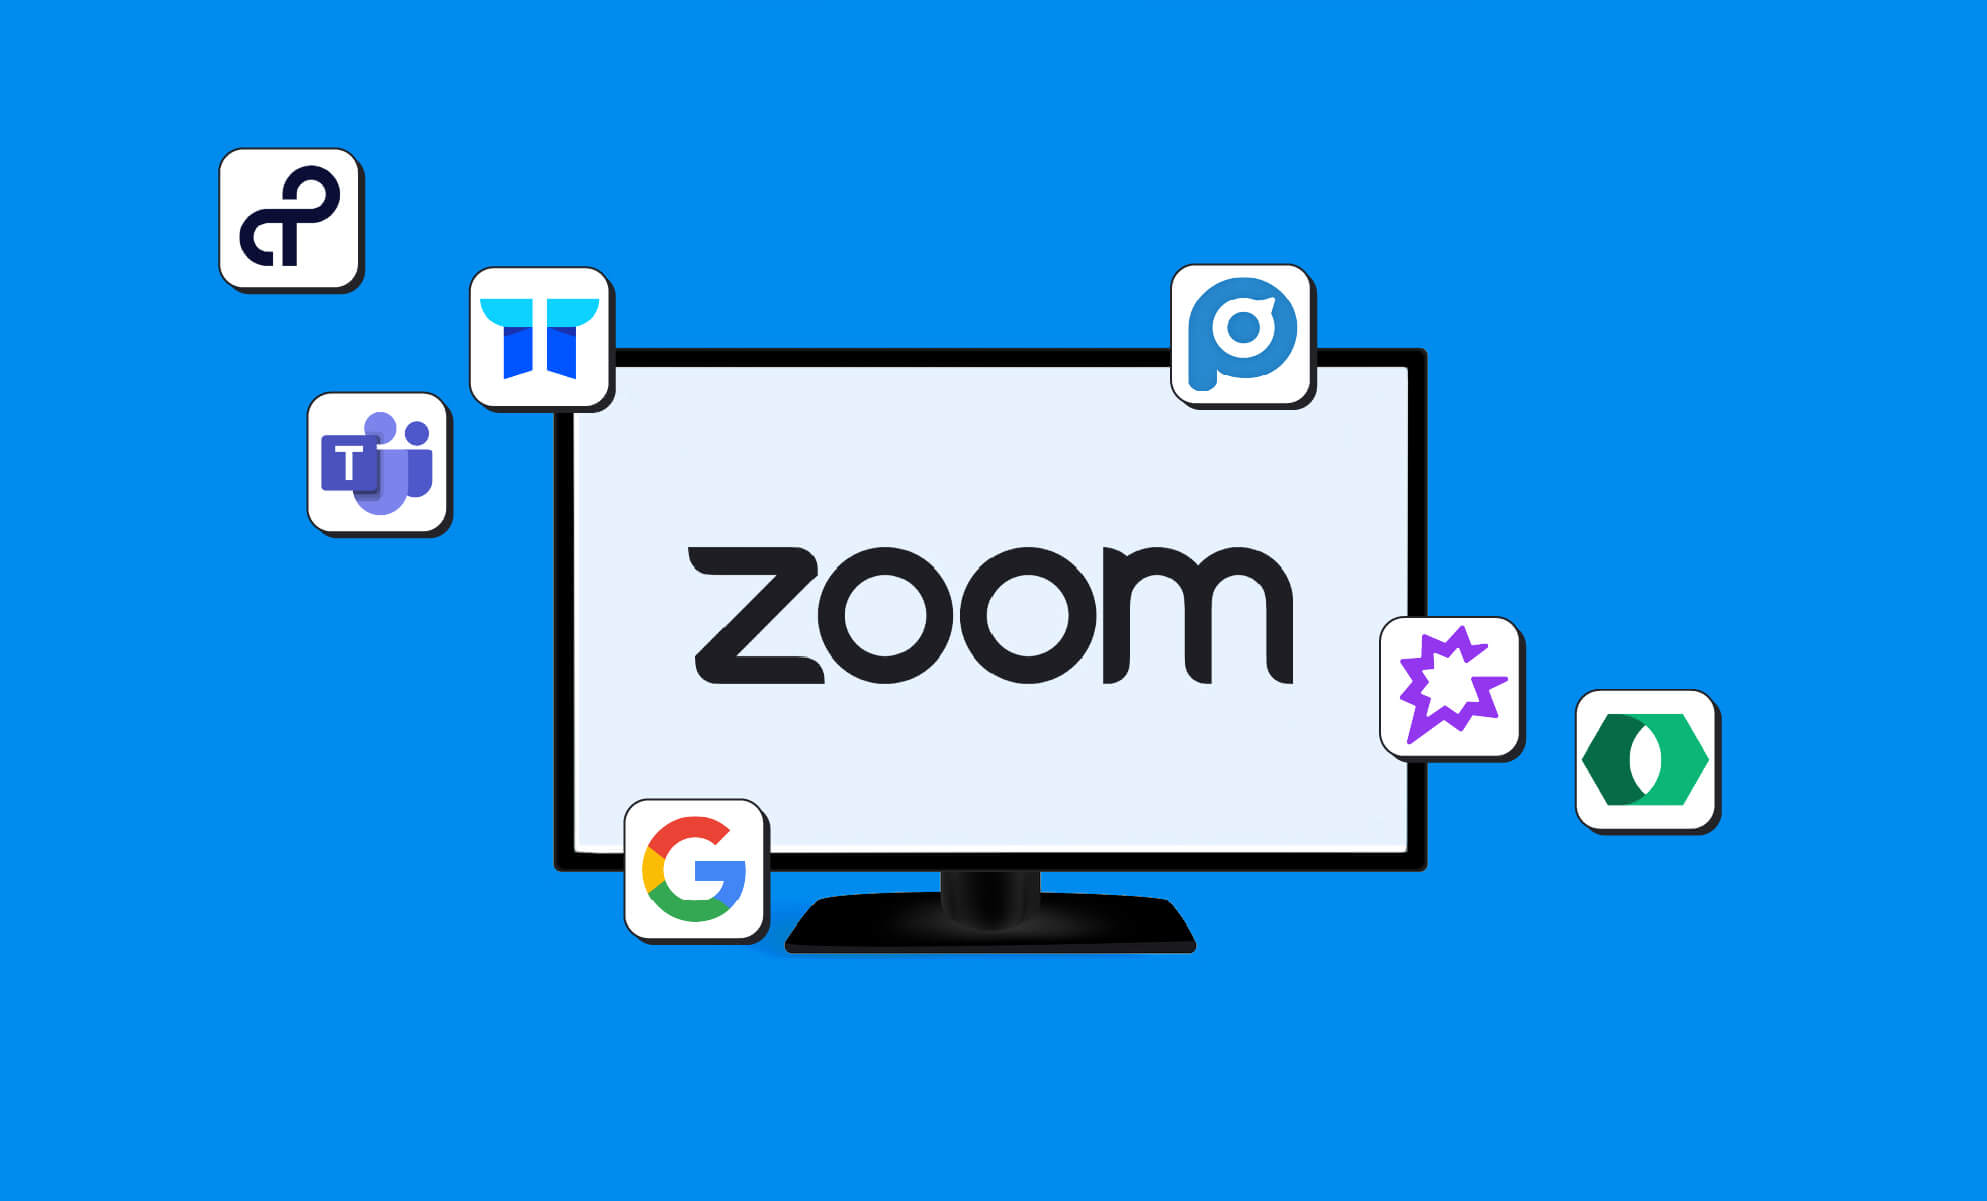 Illustrated Zoom logo on a monitor screen with mutliple integration logos, showing the need for Zoom training